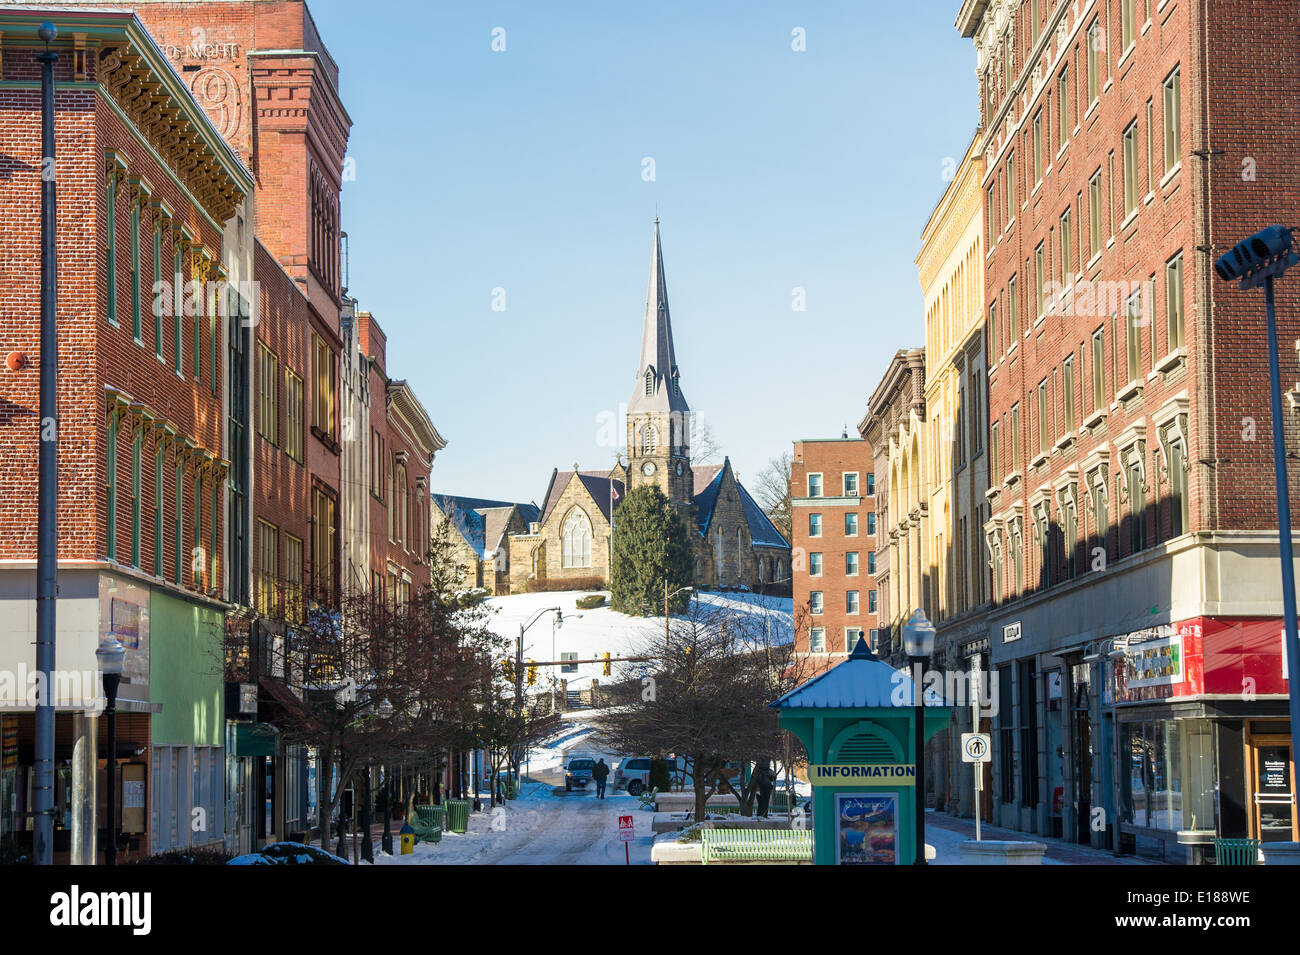 Downtown district of Cumberland MD with a church in the center. Stock Photo